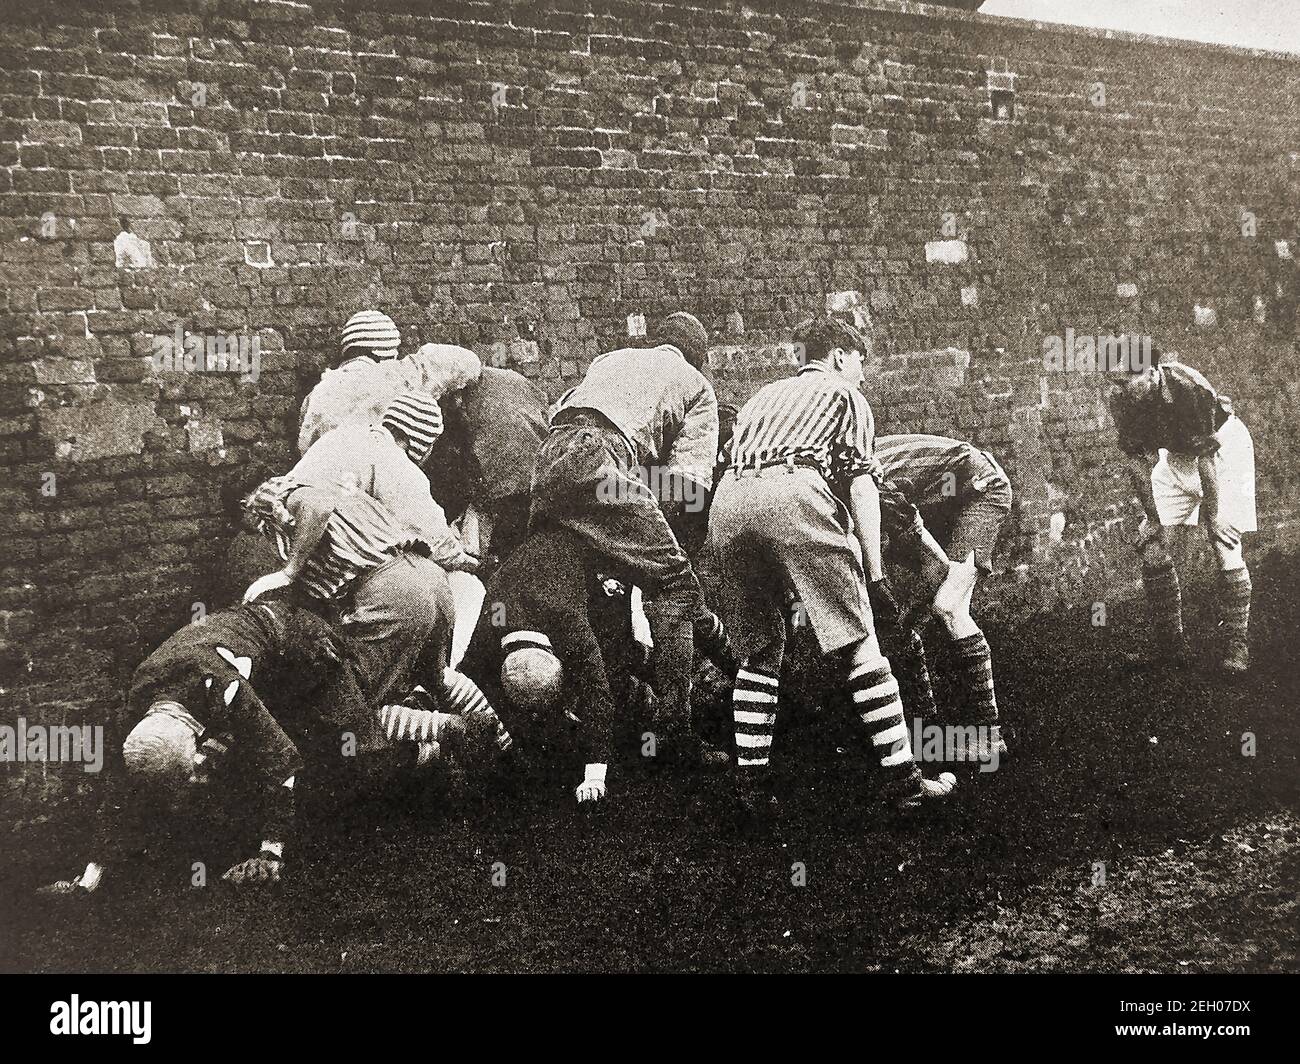 ETON UNIVERSARY, ENGLAND - An early printed photograph showing a 'bully' (Scrummage)  taking place during the annual  Eton Wall game on St Andrew's Day 1948. The Eton wall game  originated at and is still played at Eton College, played on a strip of ground 5  X 110 metres known as  The Furrow and against   a slightly curved brick wall that was built in 1717 Stock Photo